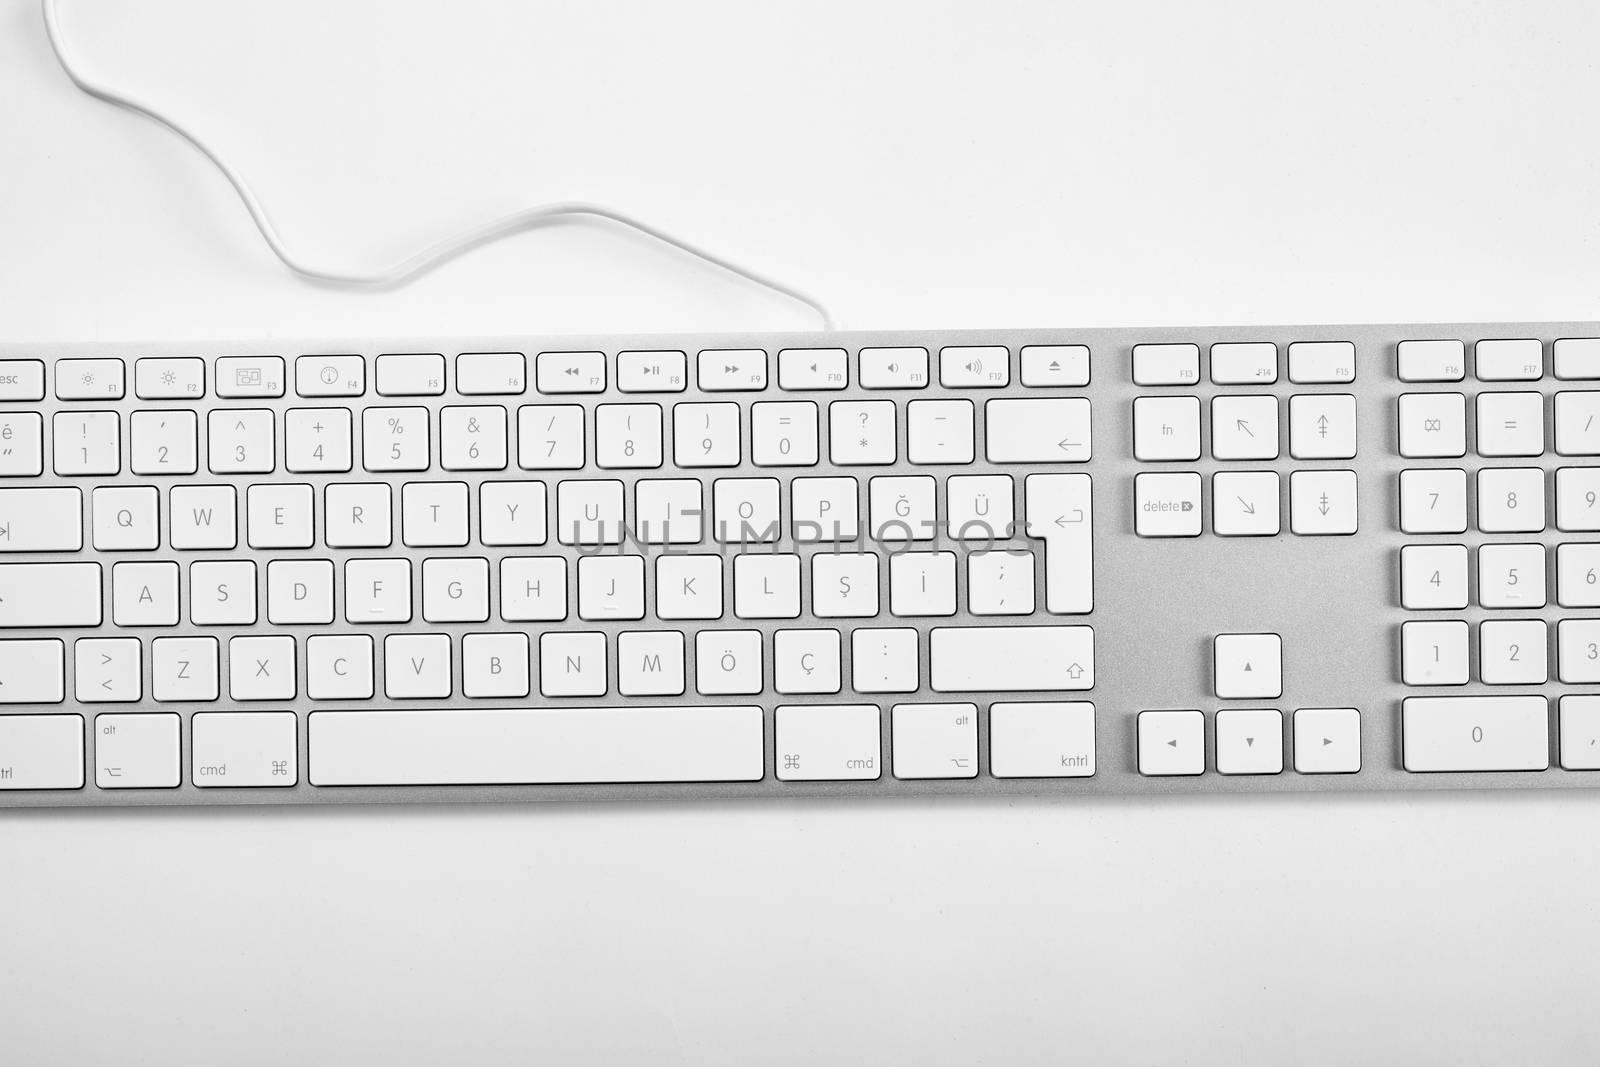 White computer keyboard on a white background